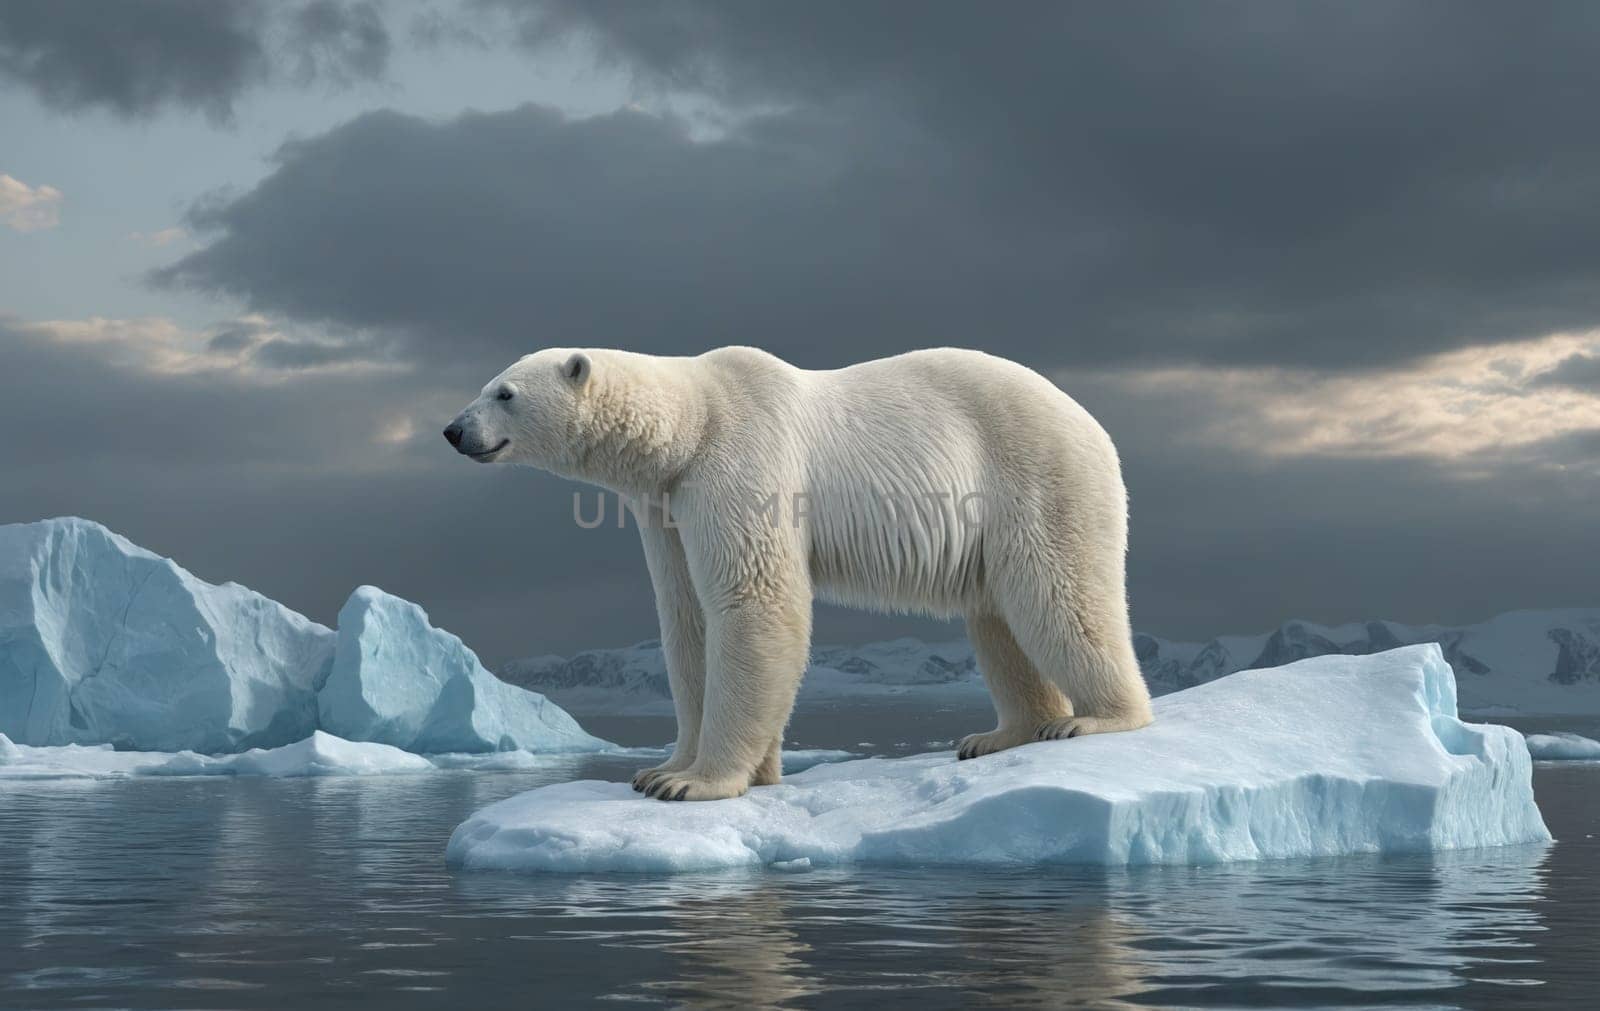 A carnivorous polar bear stands on ice in the liquid water by Andre1ns